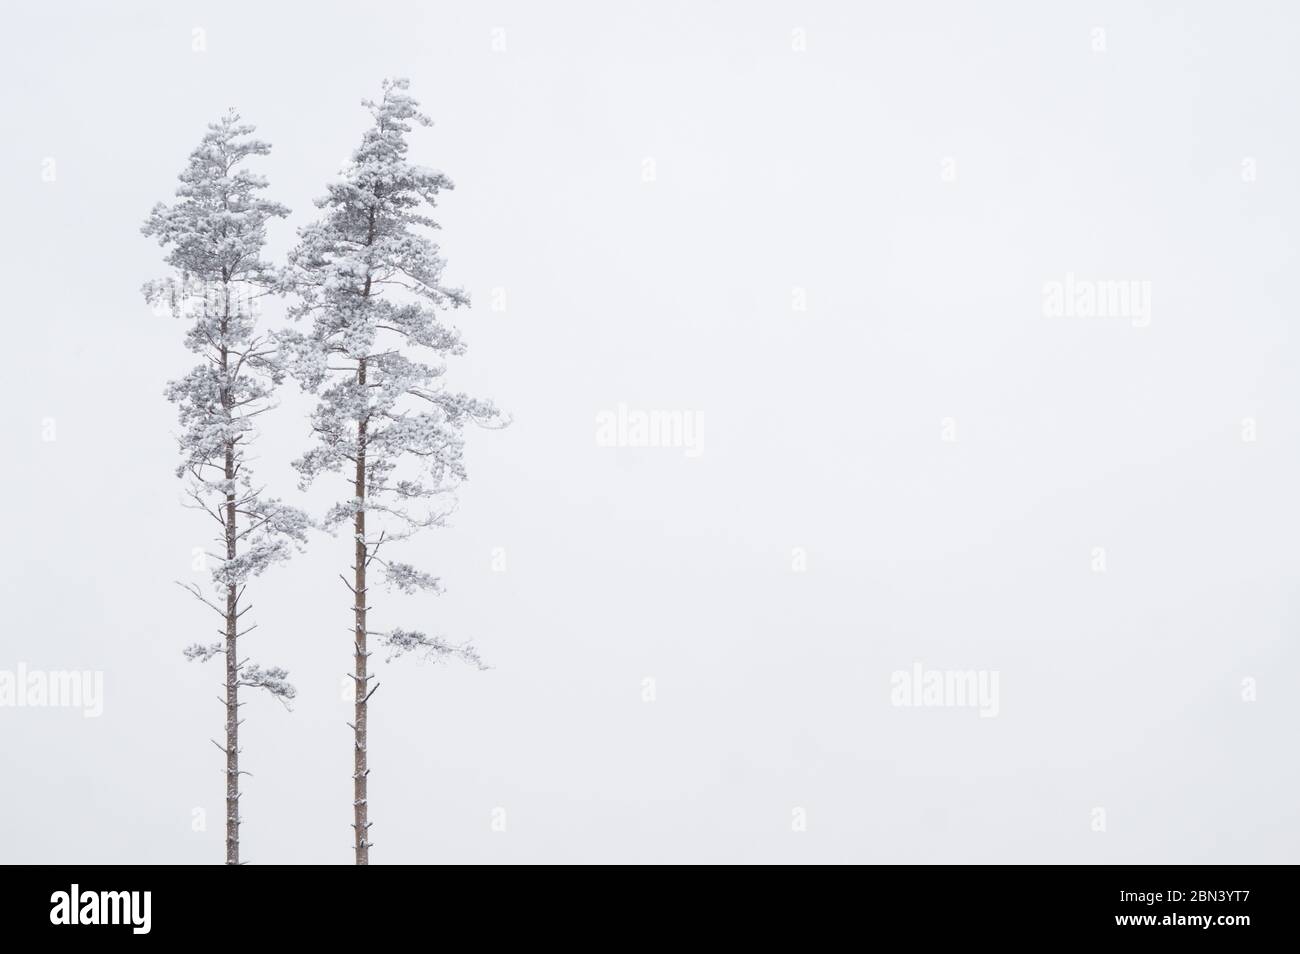 Two snow-covered pine trees. Concept for partnership and resilience. Minimalistic shot, photograhed against grey and white sky on cold winter day. Stock Photo